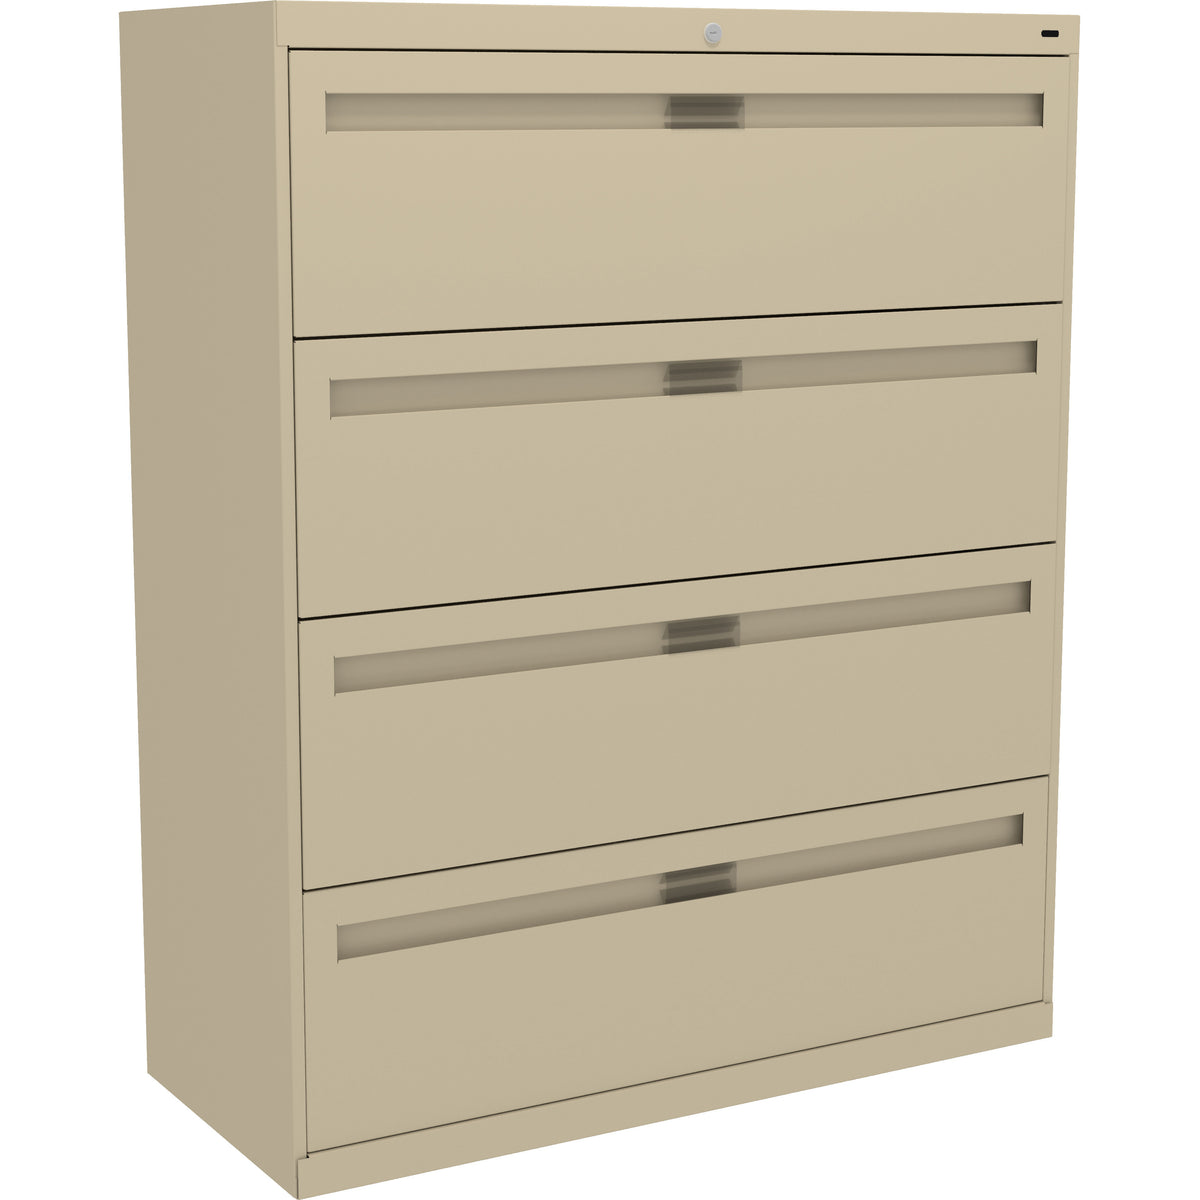 Tennsco 42" Wide Four-Drawer Lateral File with Retractable Doors, LPL4248L41